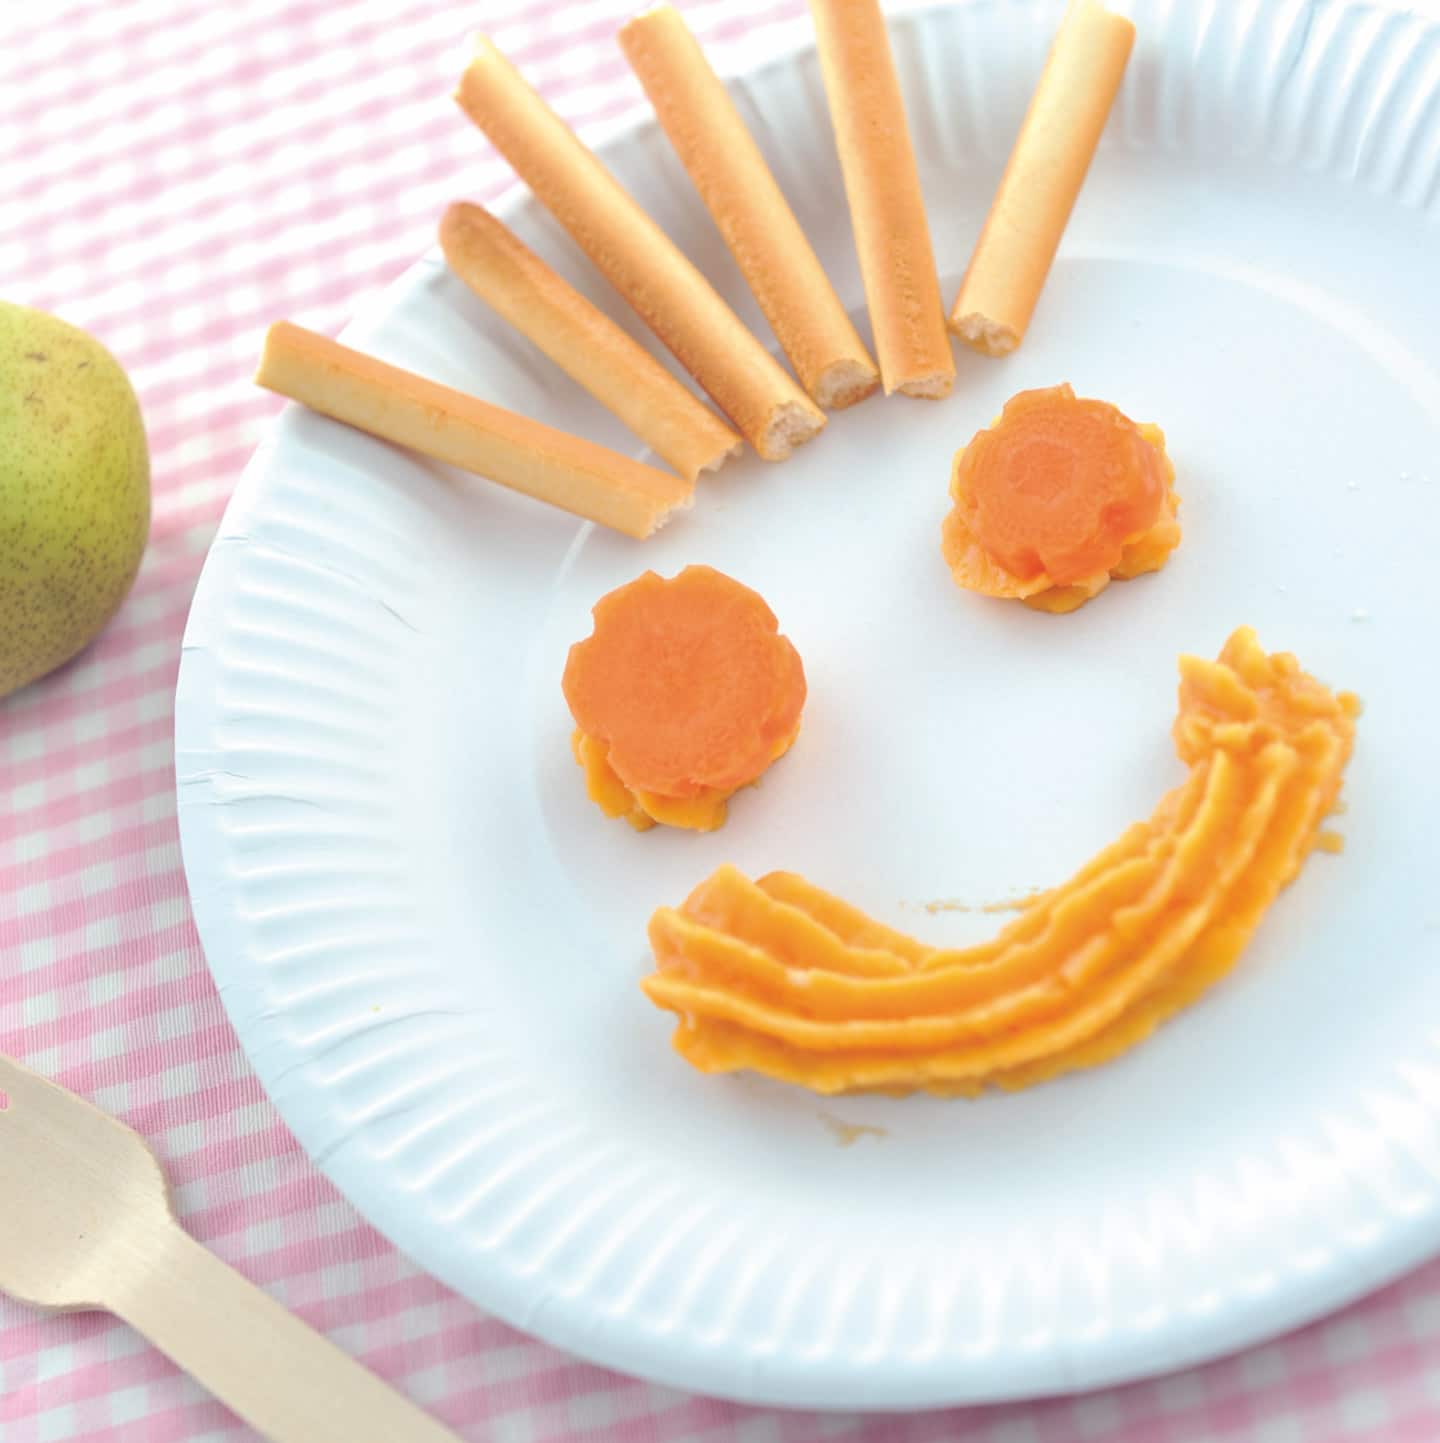 A babys plate with a smiling face made out of carrots and bredsticks